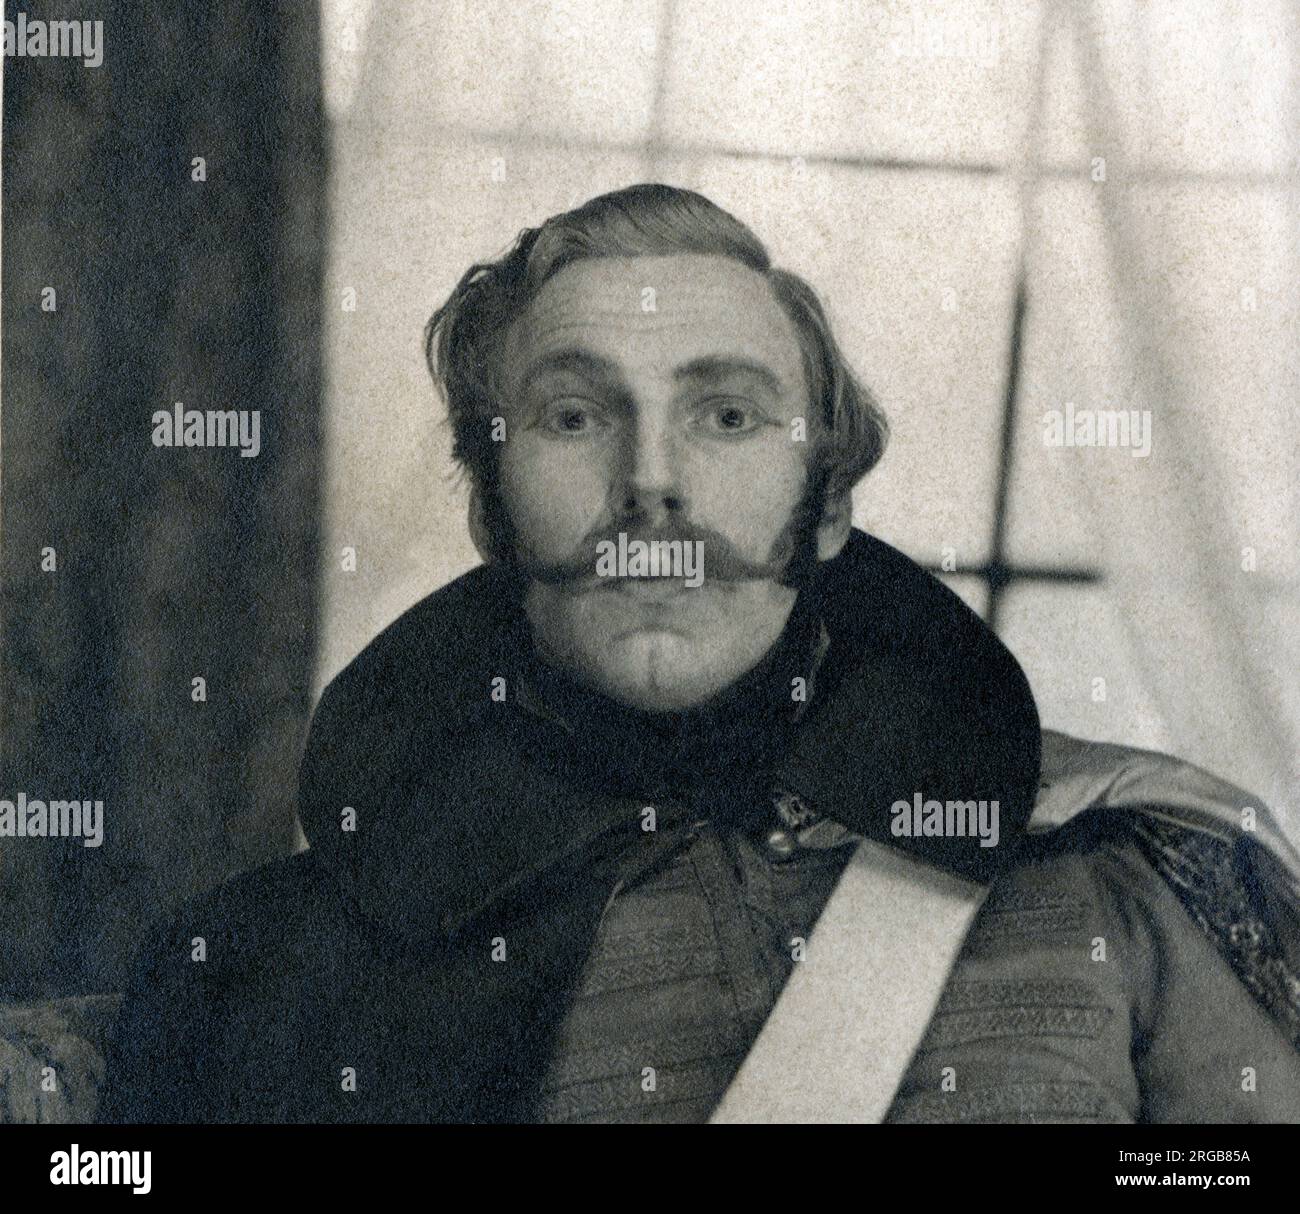 An unnamed actor in early to mid 19th century military costume poses for a studio photograph. The photograph was taken in late November, so possibly he was about to appear in a Christmas show/pantomime? Stock Photo